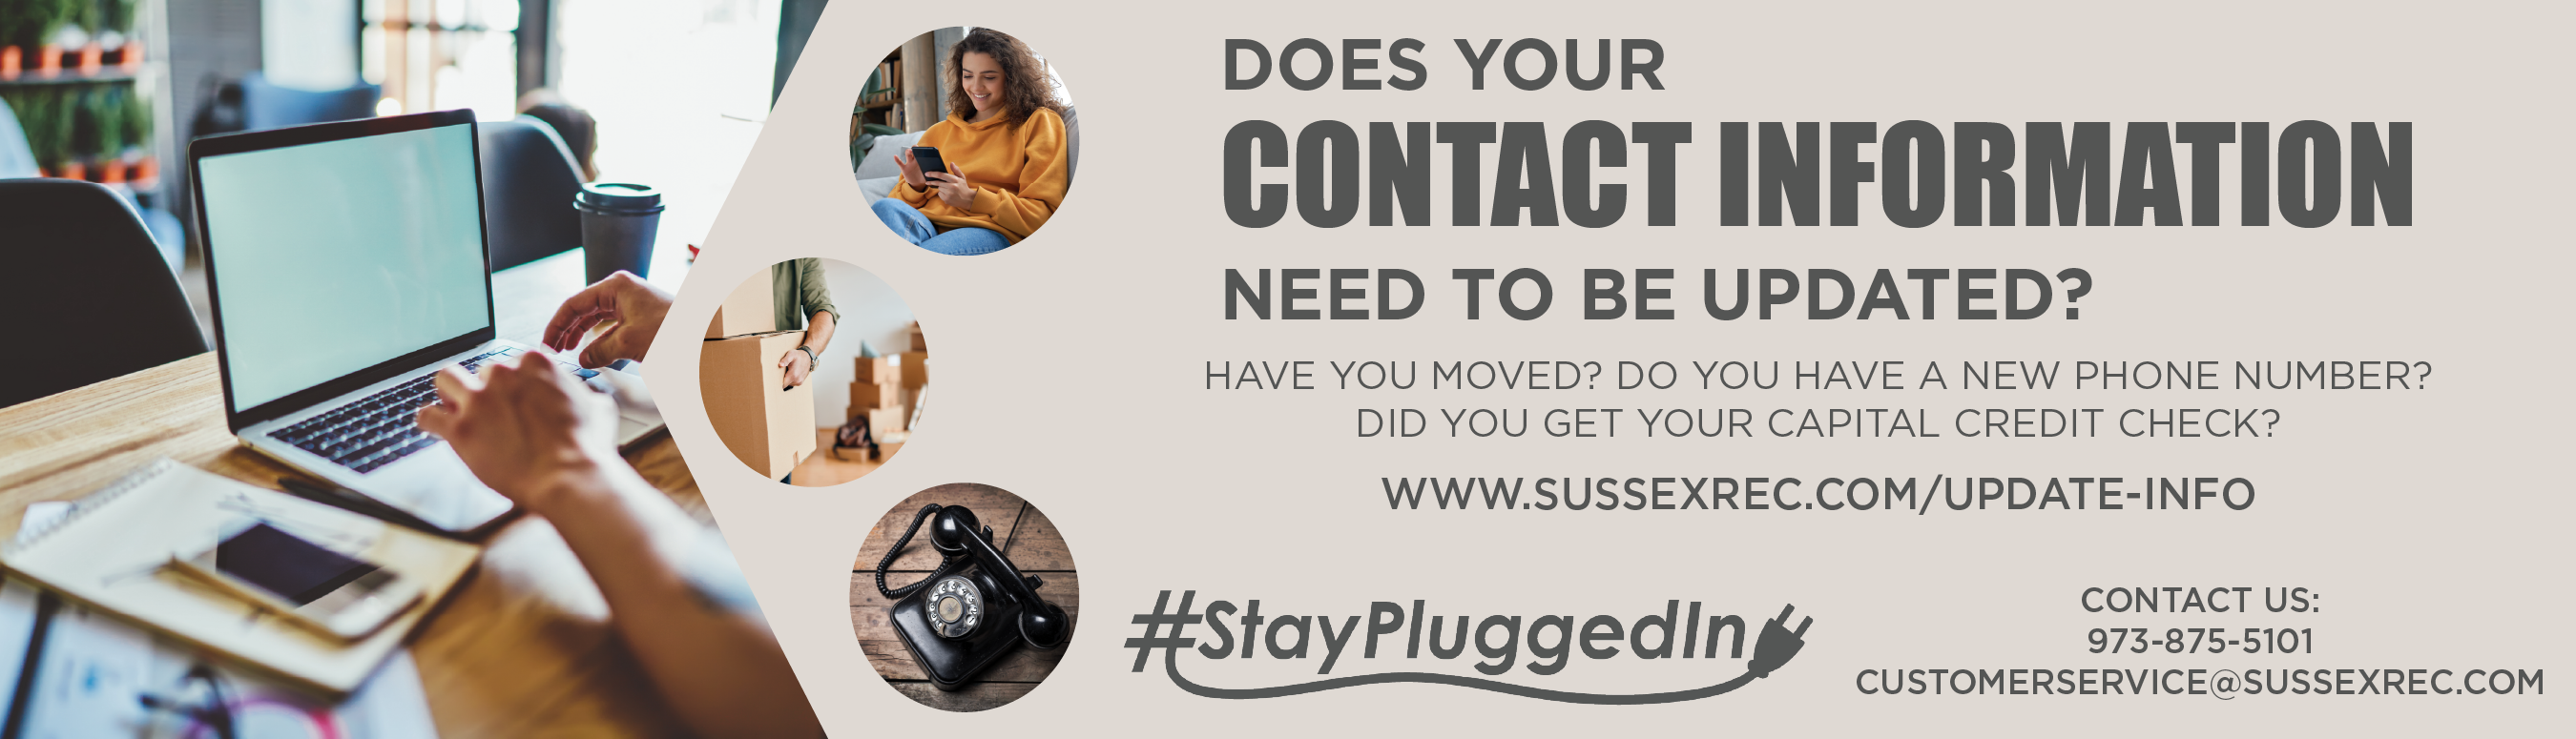 Does Your CONTACT INFORMATION Need To Be Updated? Have you moved? Do you have a new phone number? Did you get your capital credit check? www.sussexrec.com/update-info. #StayPluggedIn Contact Us: 973-875-5101, customerservice@sussexrec.com